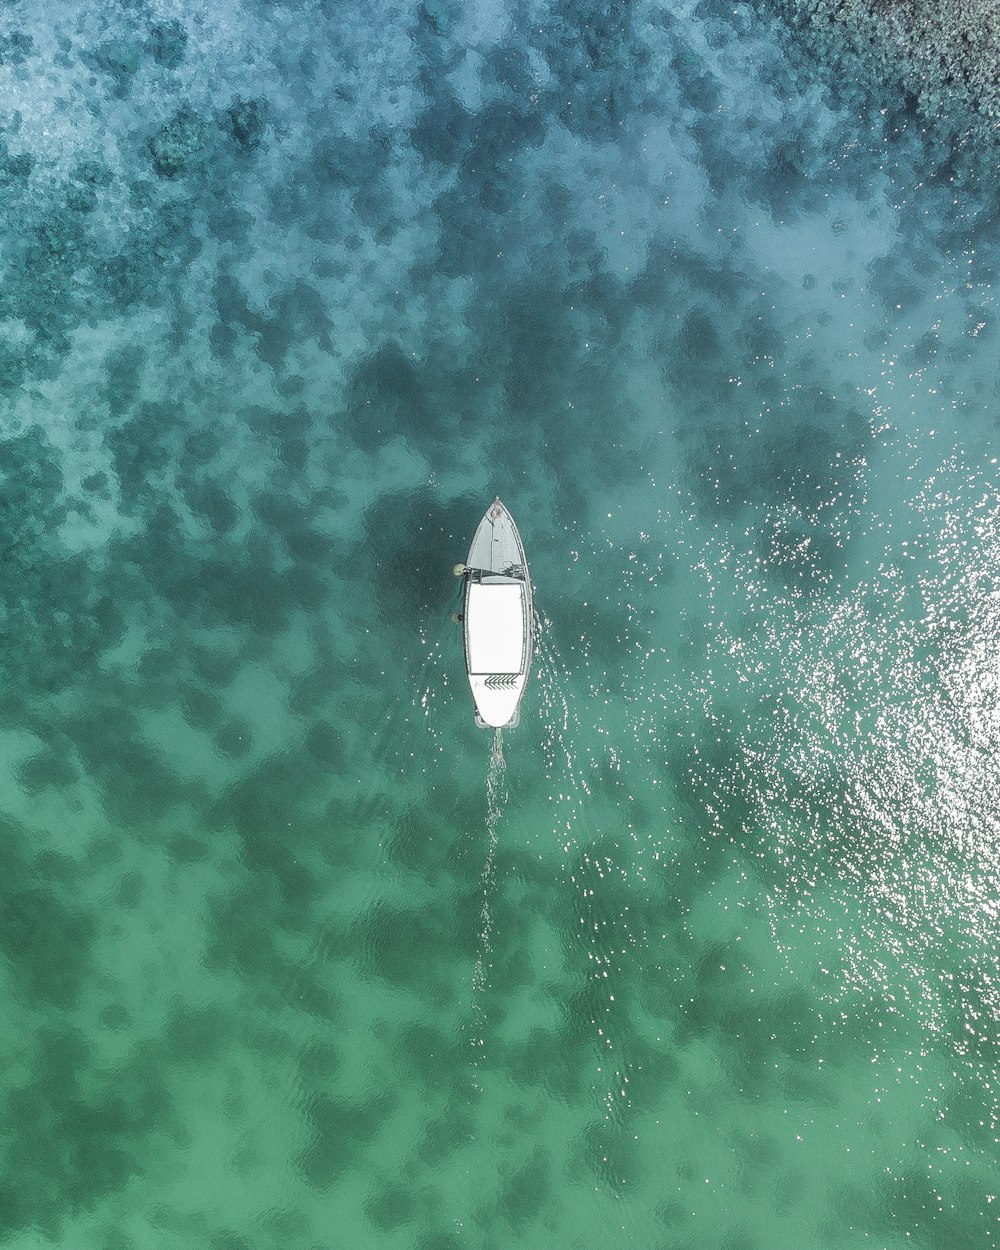 bird's eye view photo of white boat on body of water during daytime